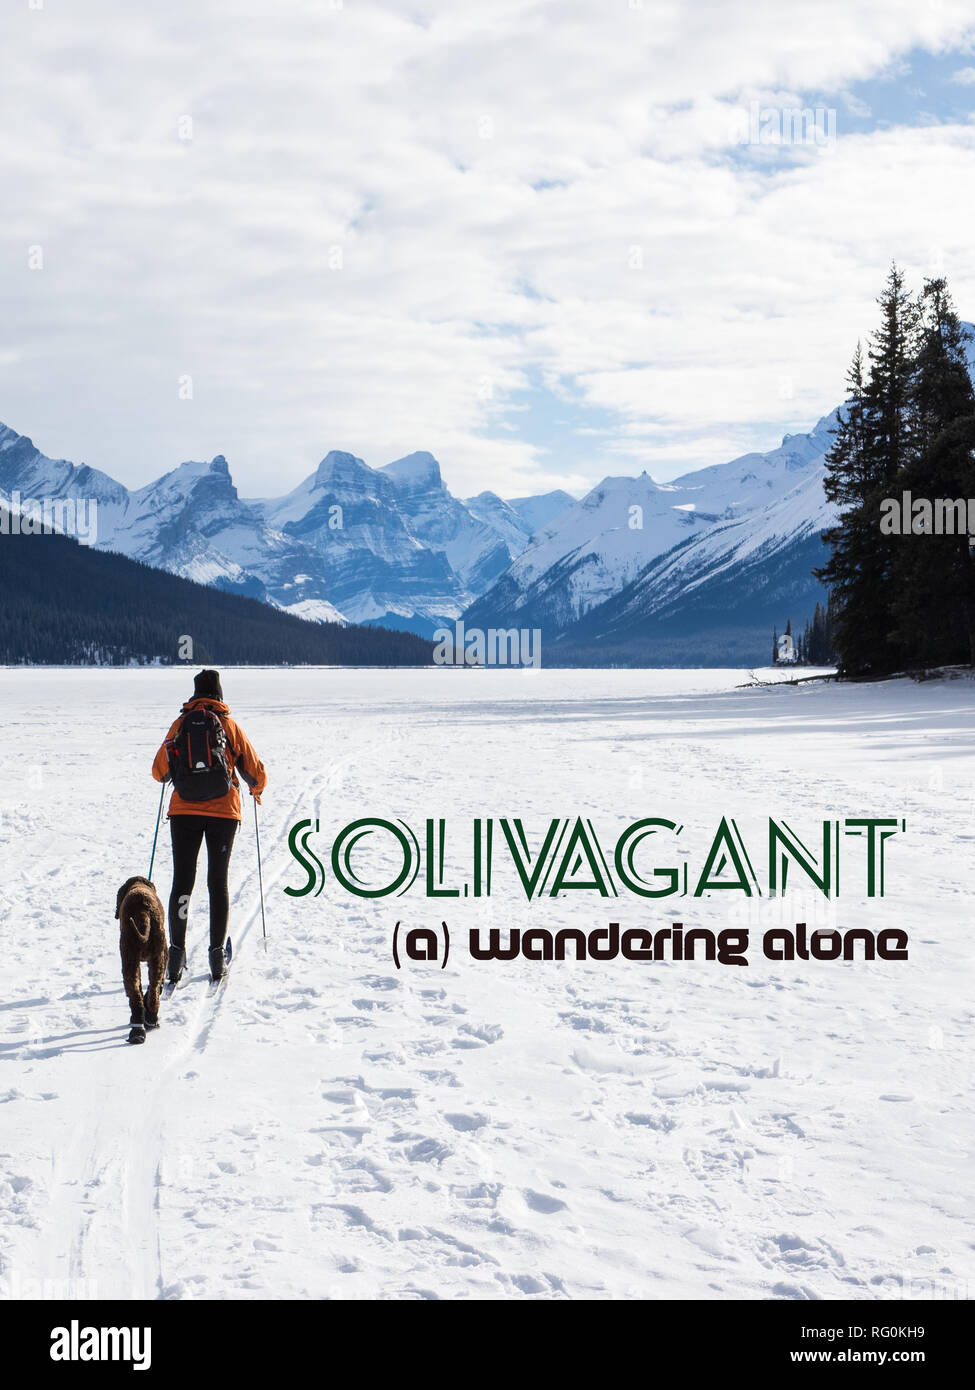 Motivational Solivagant A Wandering Alone 2a Jpg Rg0kjc Stock